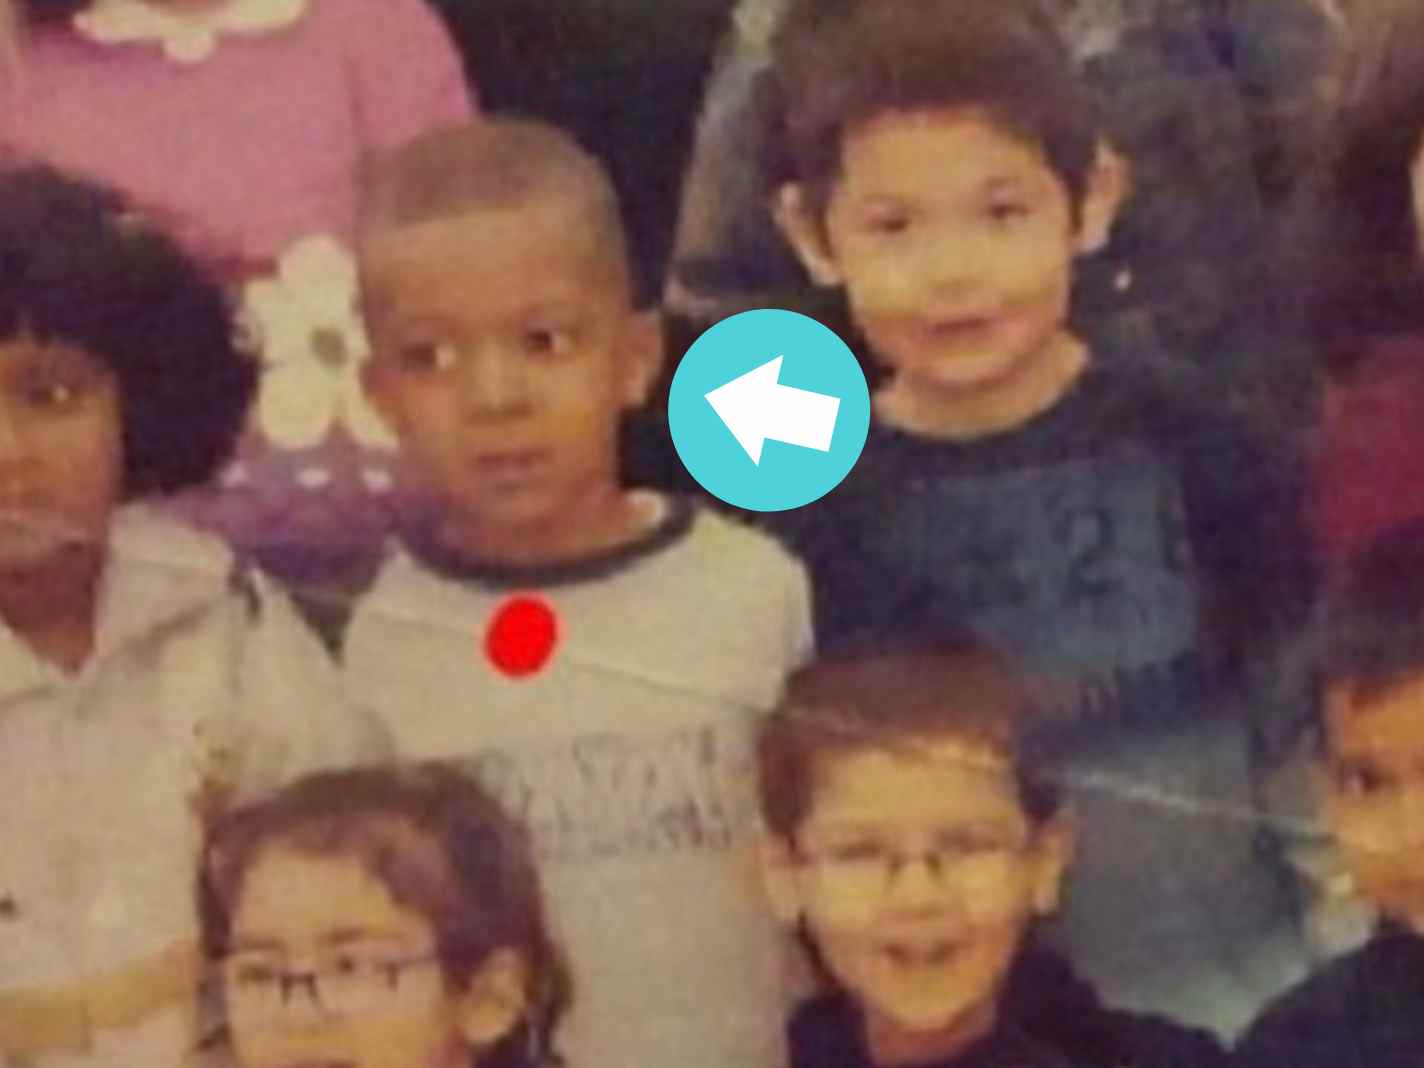 Fans Unearth Unseen Photos Of Kylian Mbappe As A Child